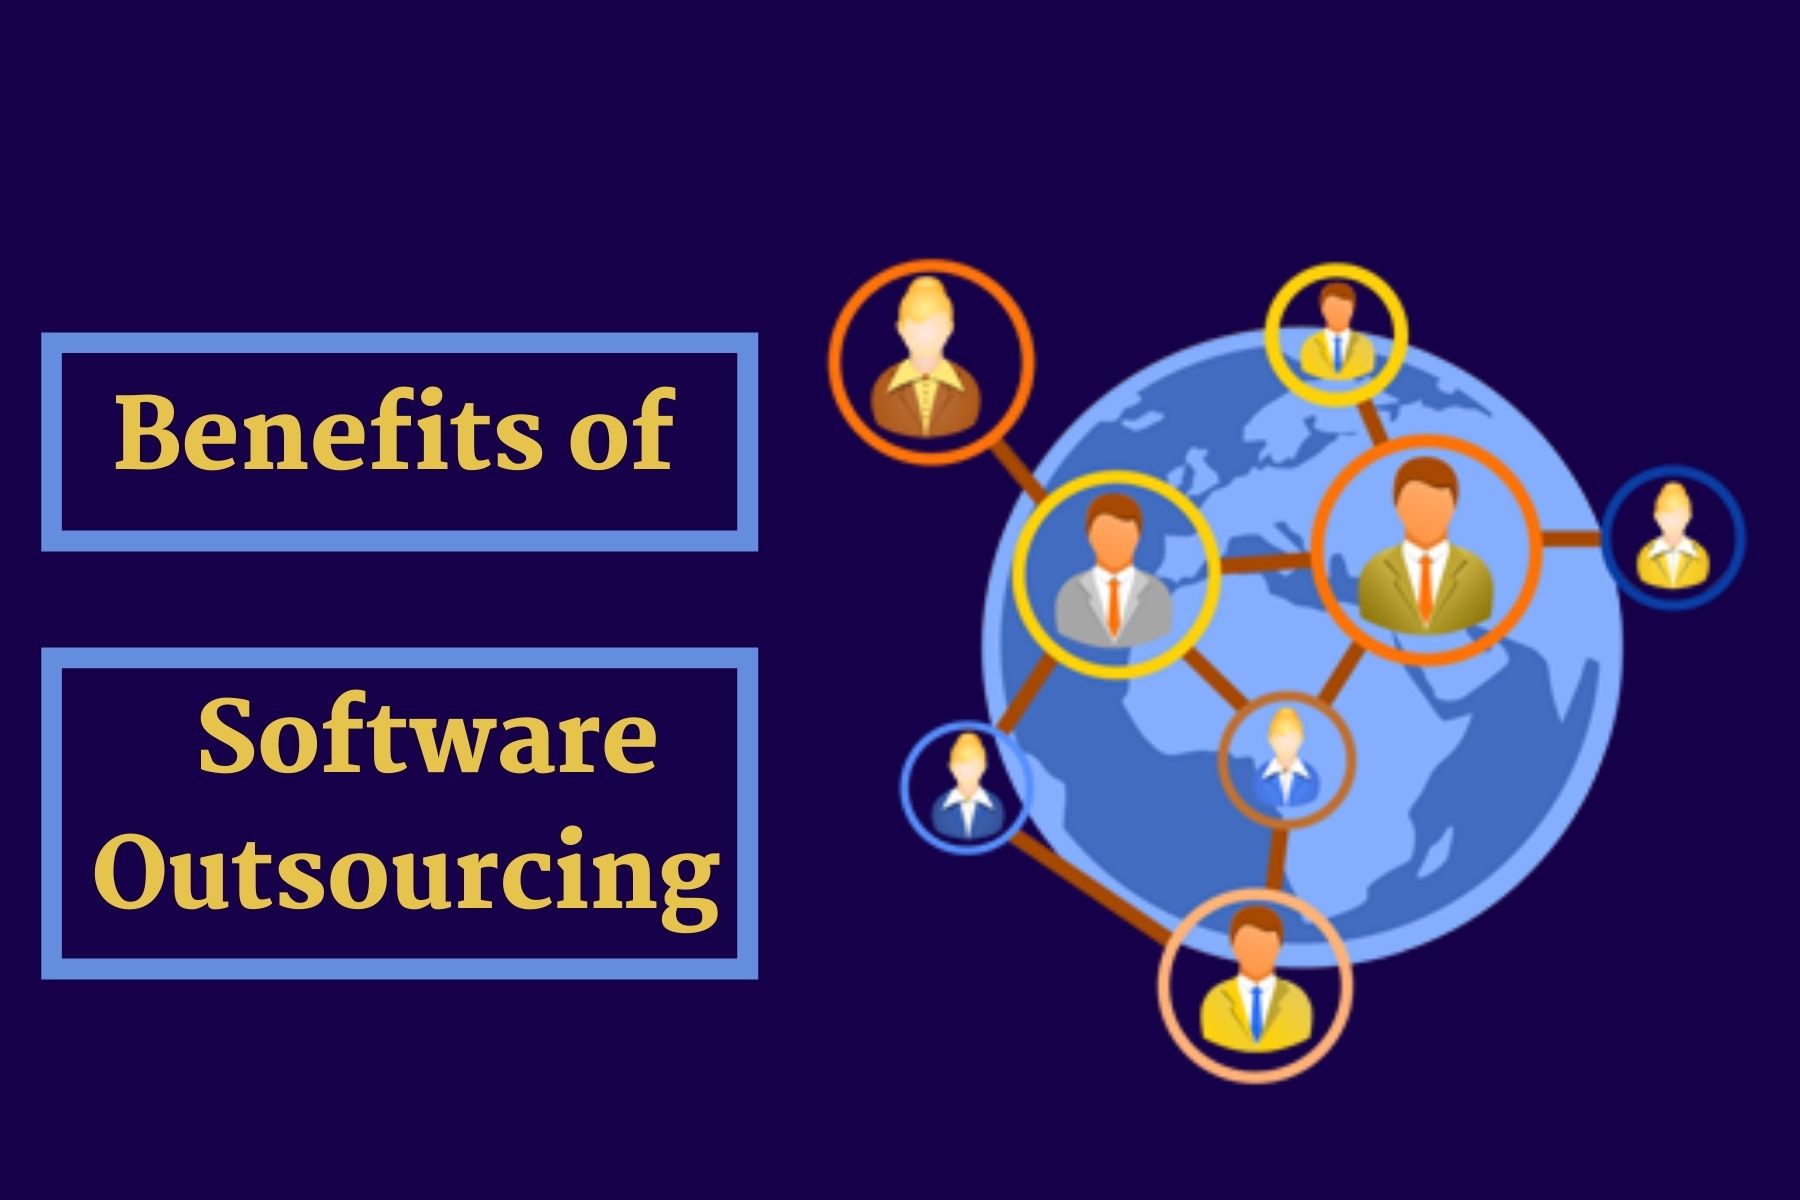 benefits of software outsourcing